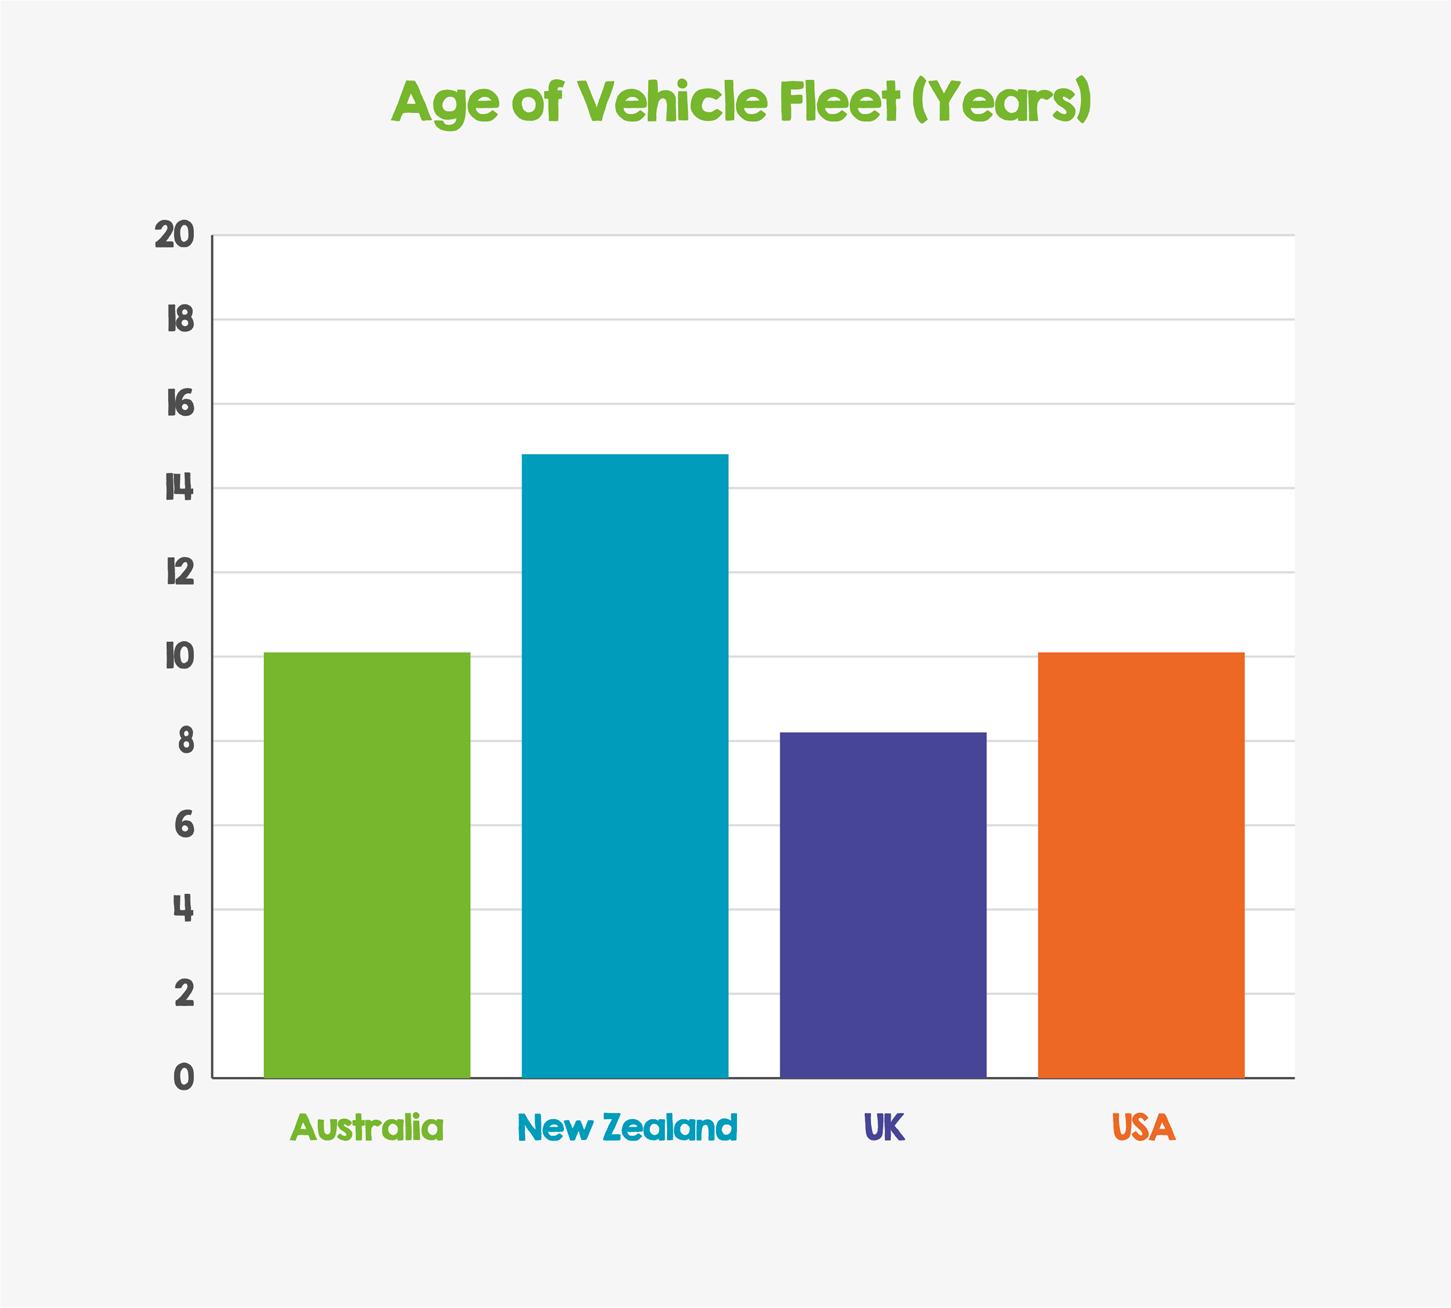 Chart showing the age of vehicle fleet compared to Australia, UK and USA, New Zealand is highest